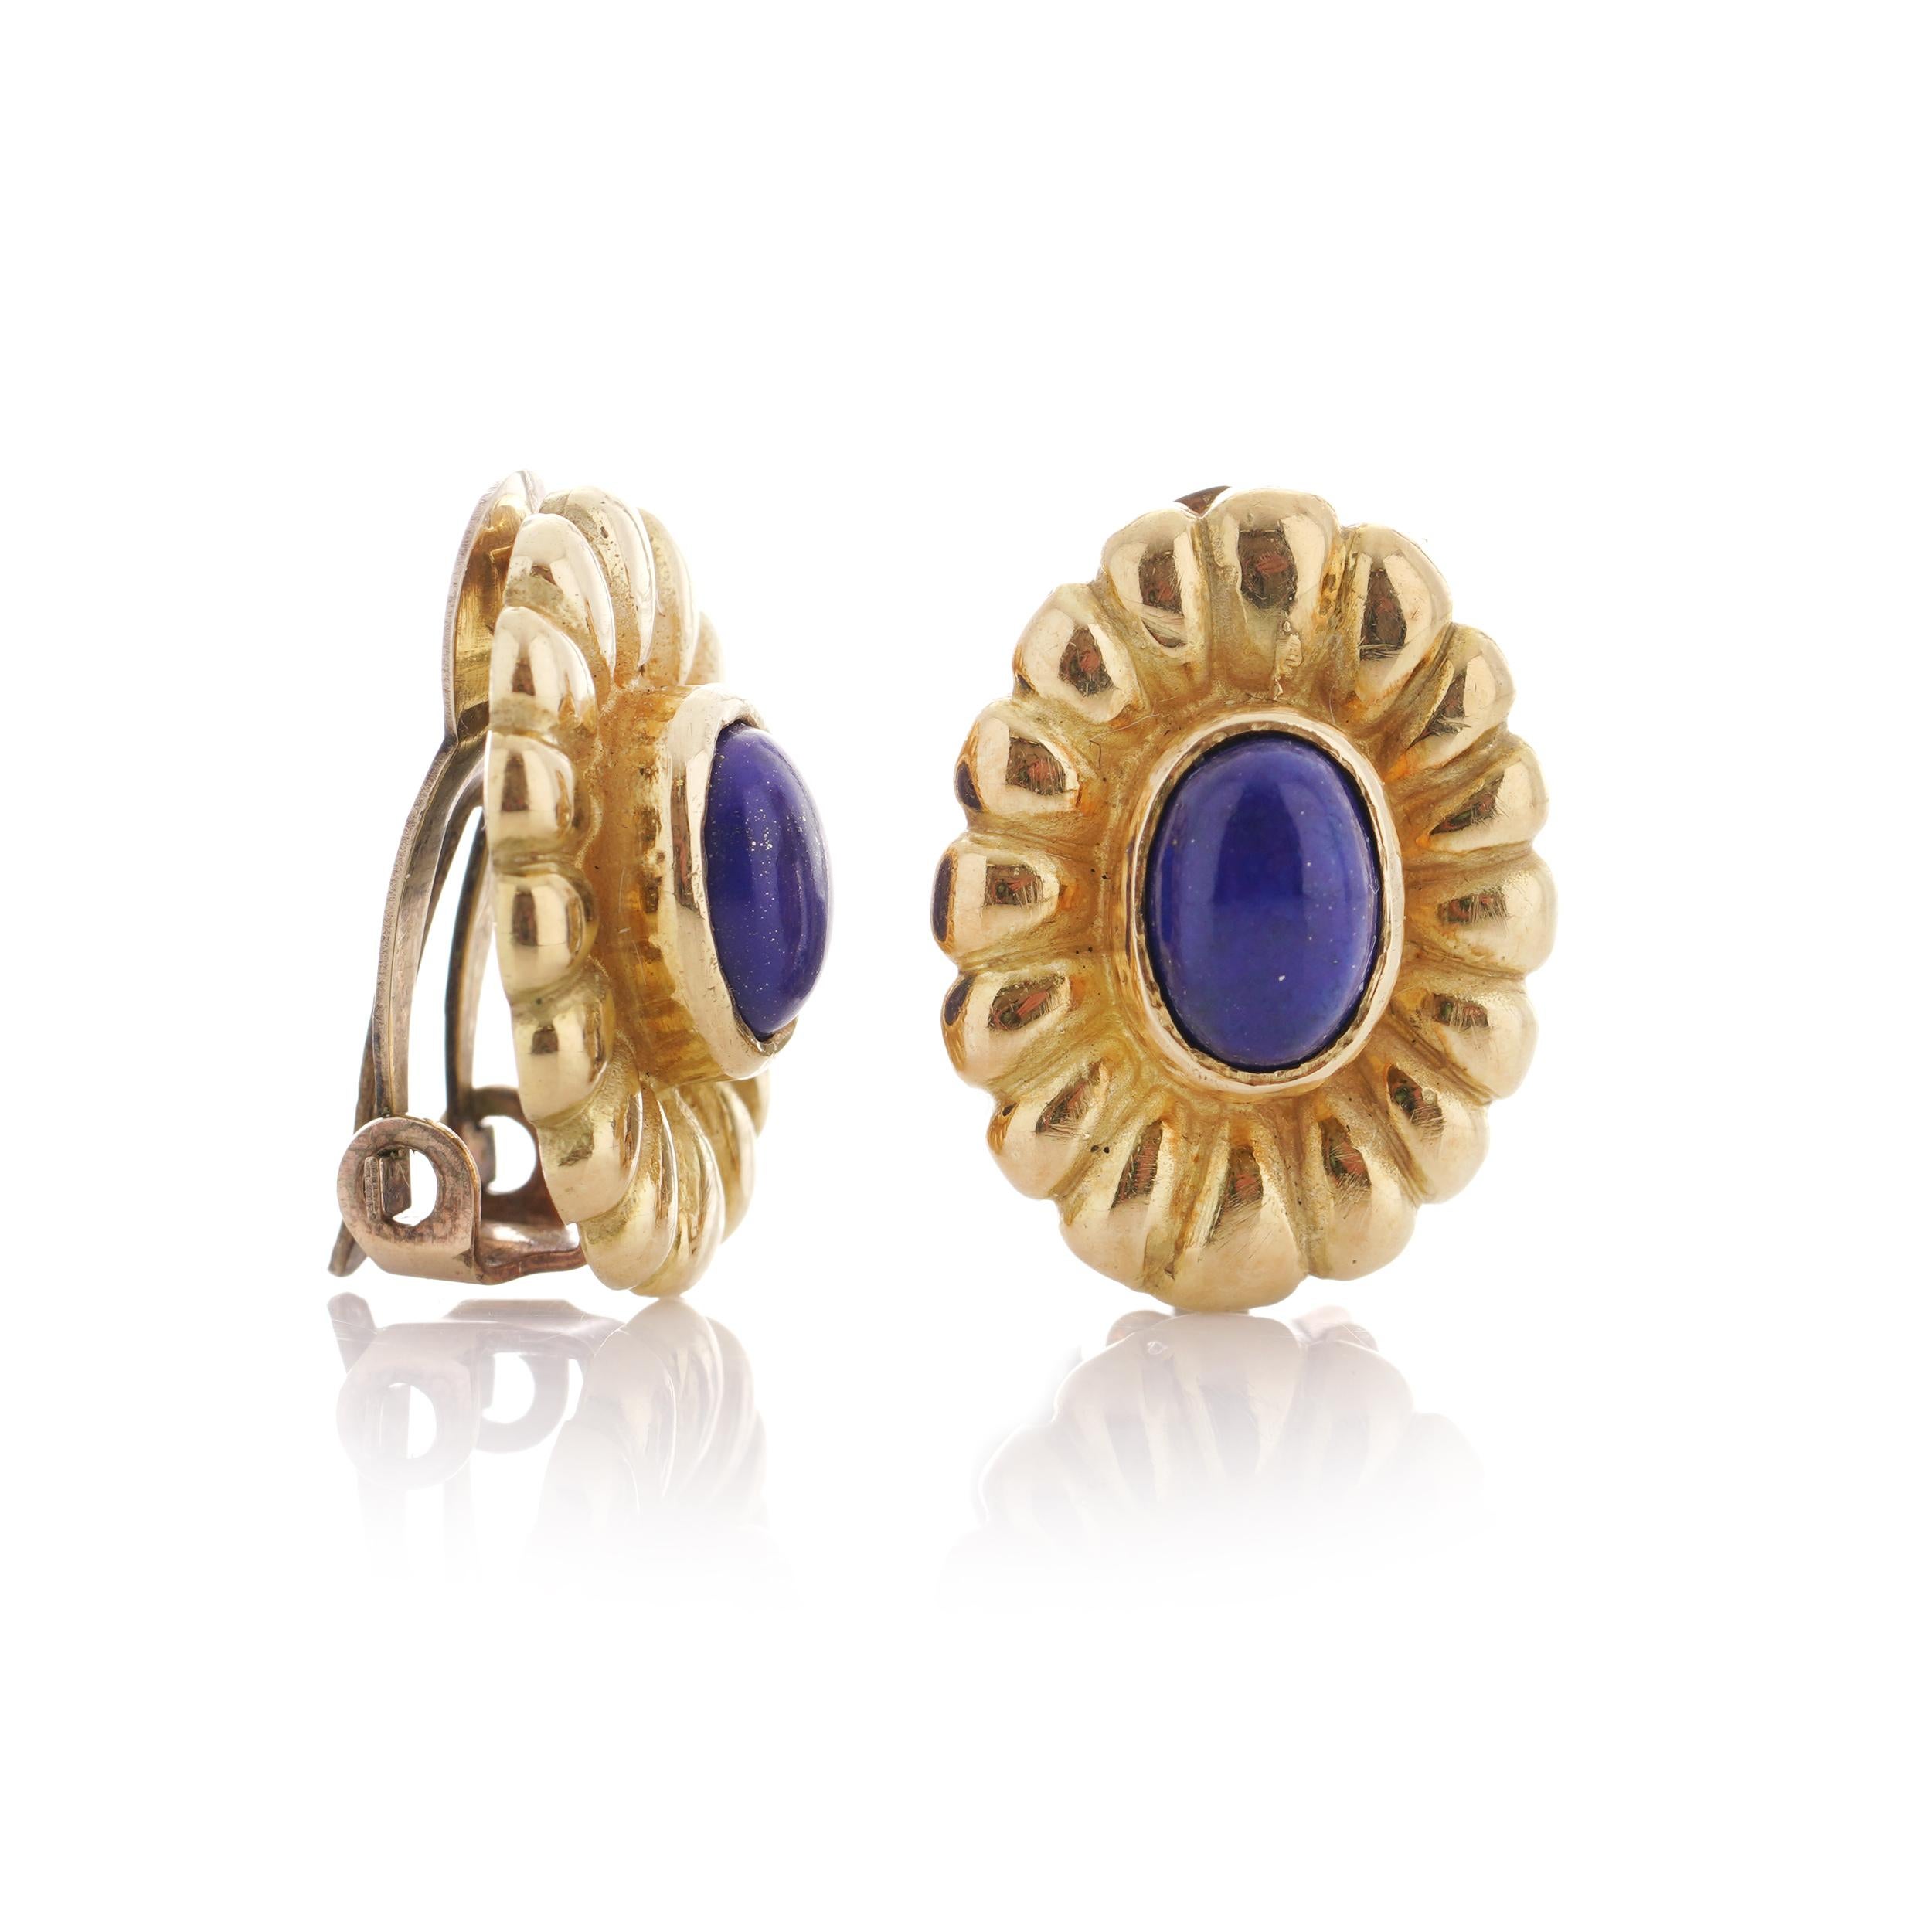 Vintage 18kt. yellow gold flower-shaped pair of clip-on earrings set with lapis lazuli.
Made in circa 1980's
Please note: clips have been added later and bear the 9kt. gold mark.

Dimensions -
Size: 1.7 x 1.2 cm
Weight: 8.2 grams

Lapis lazuli